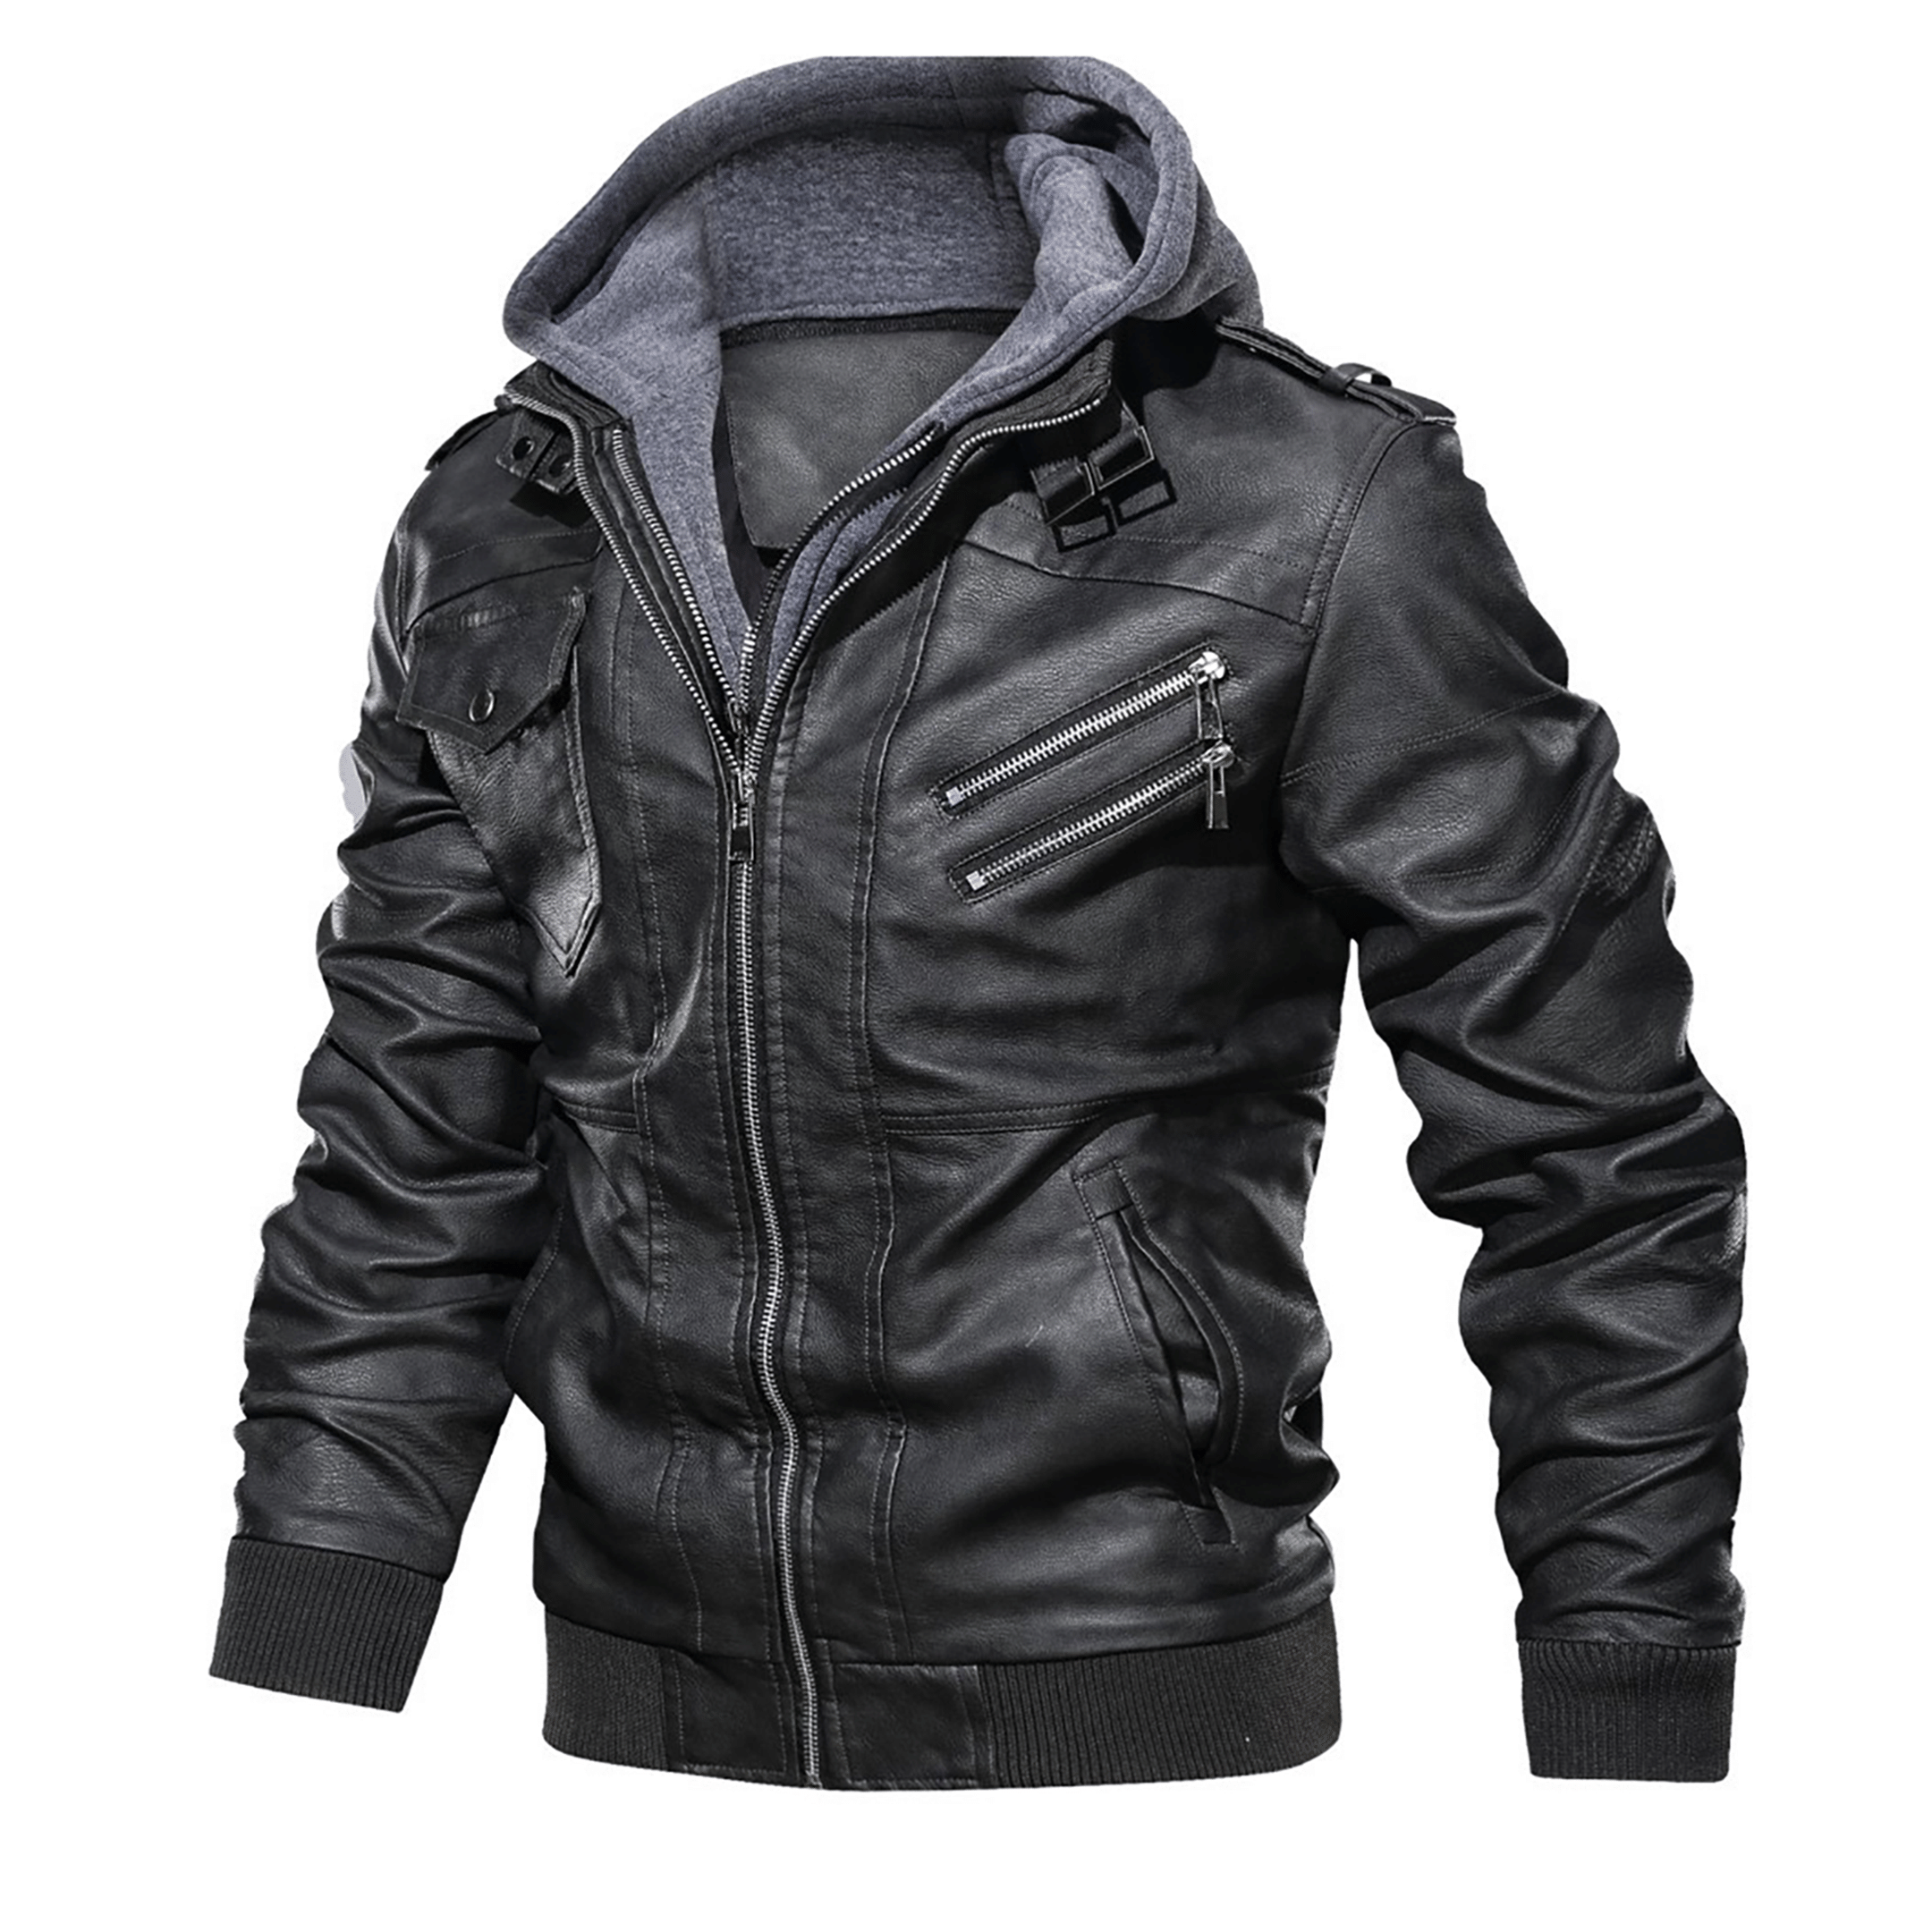 Top leather jackets and latest products 445